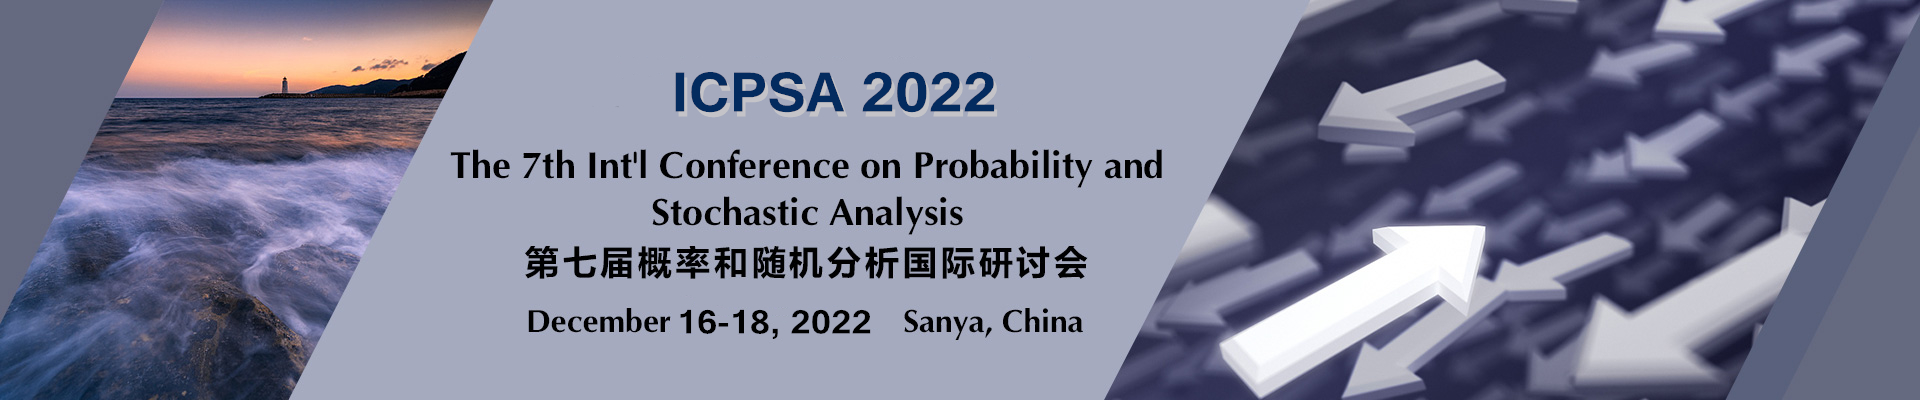 The 7th Int'l Conference on Probability and Stochastic Analysis (ICPSA 2022)